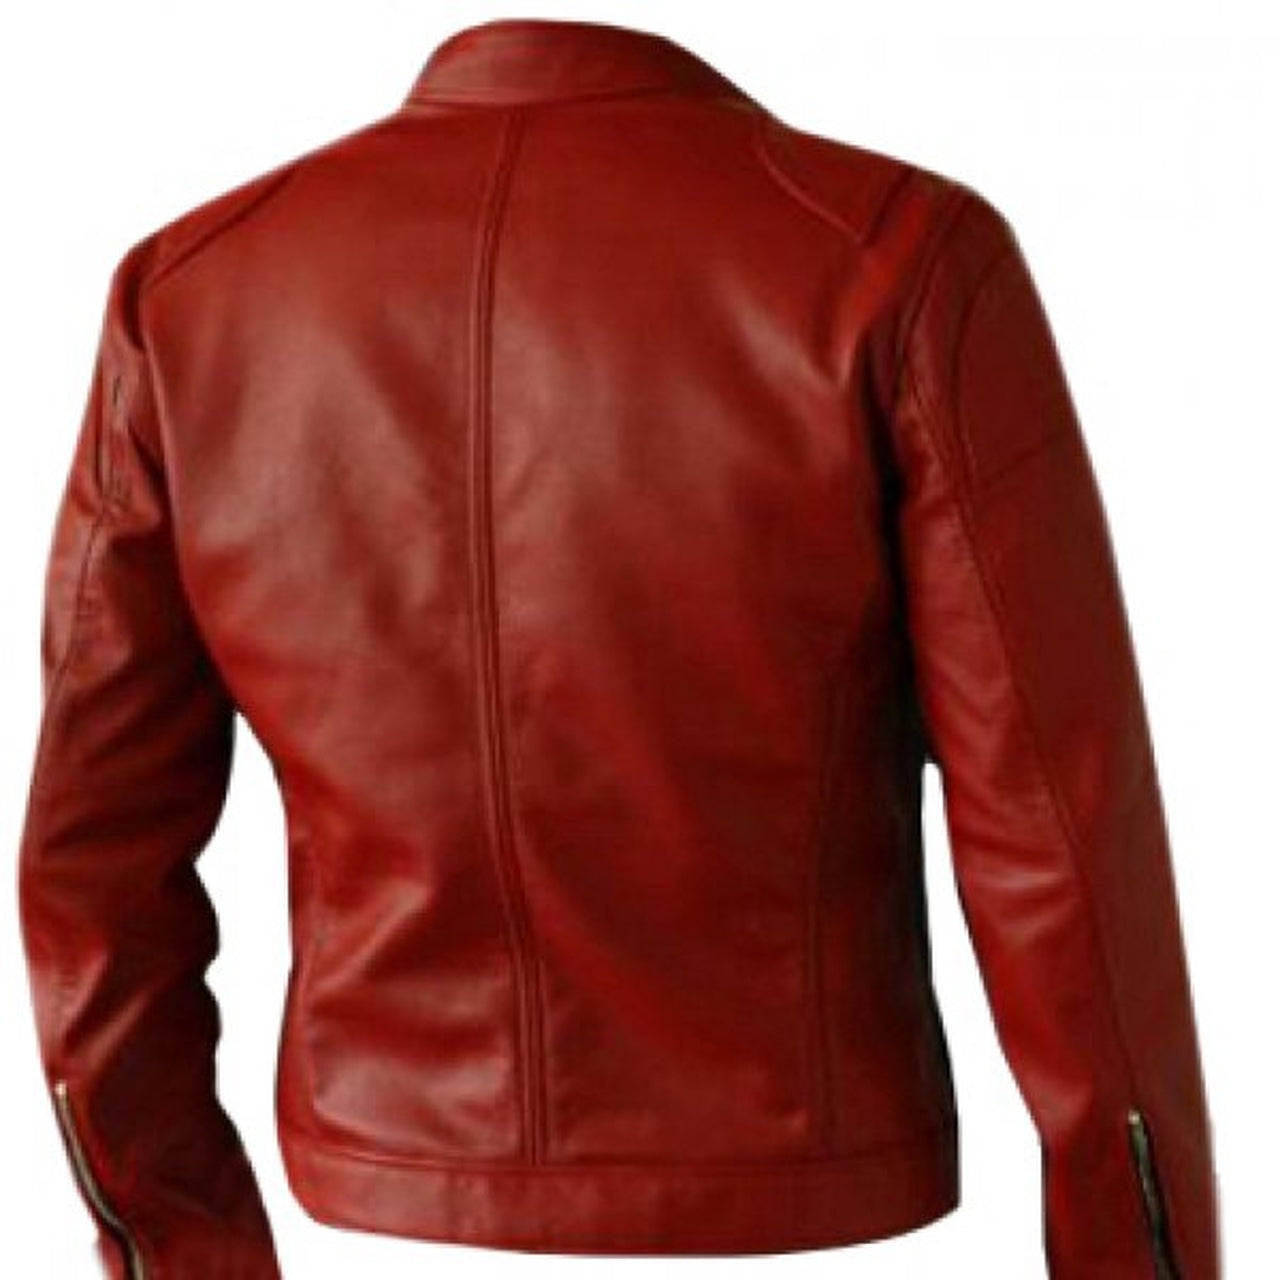 Biker Style Genuine Leather Jacket With Zipper Pocket In Red Vine Color